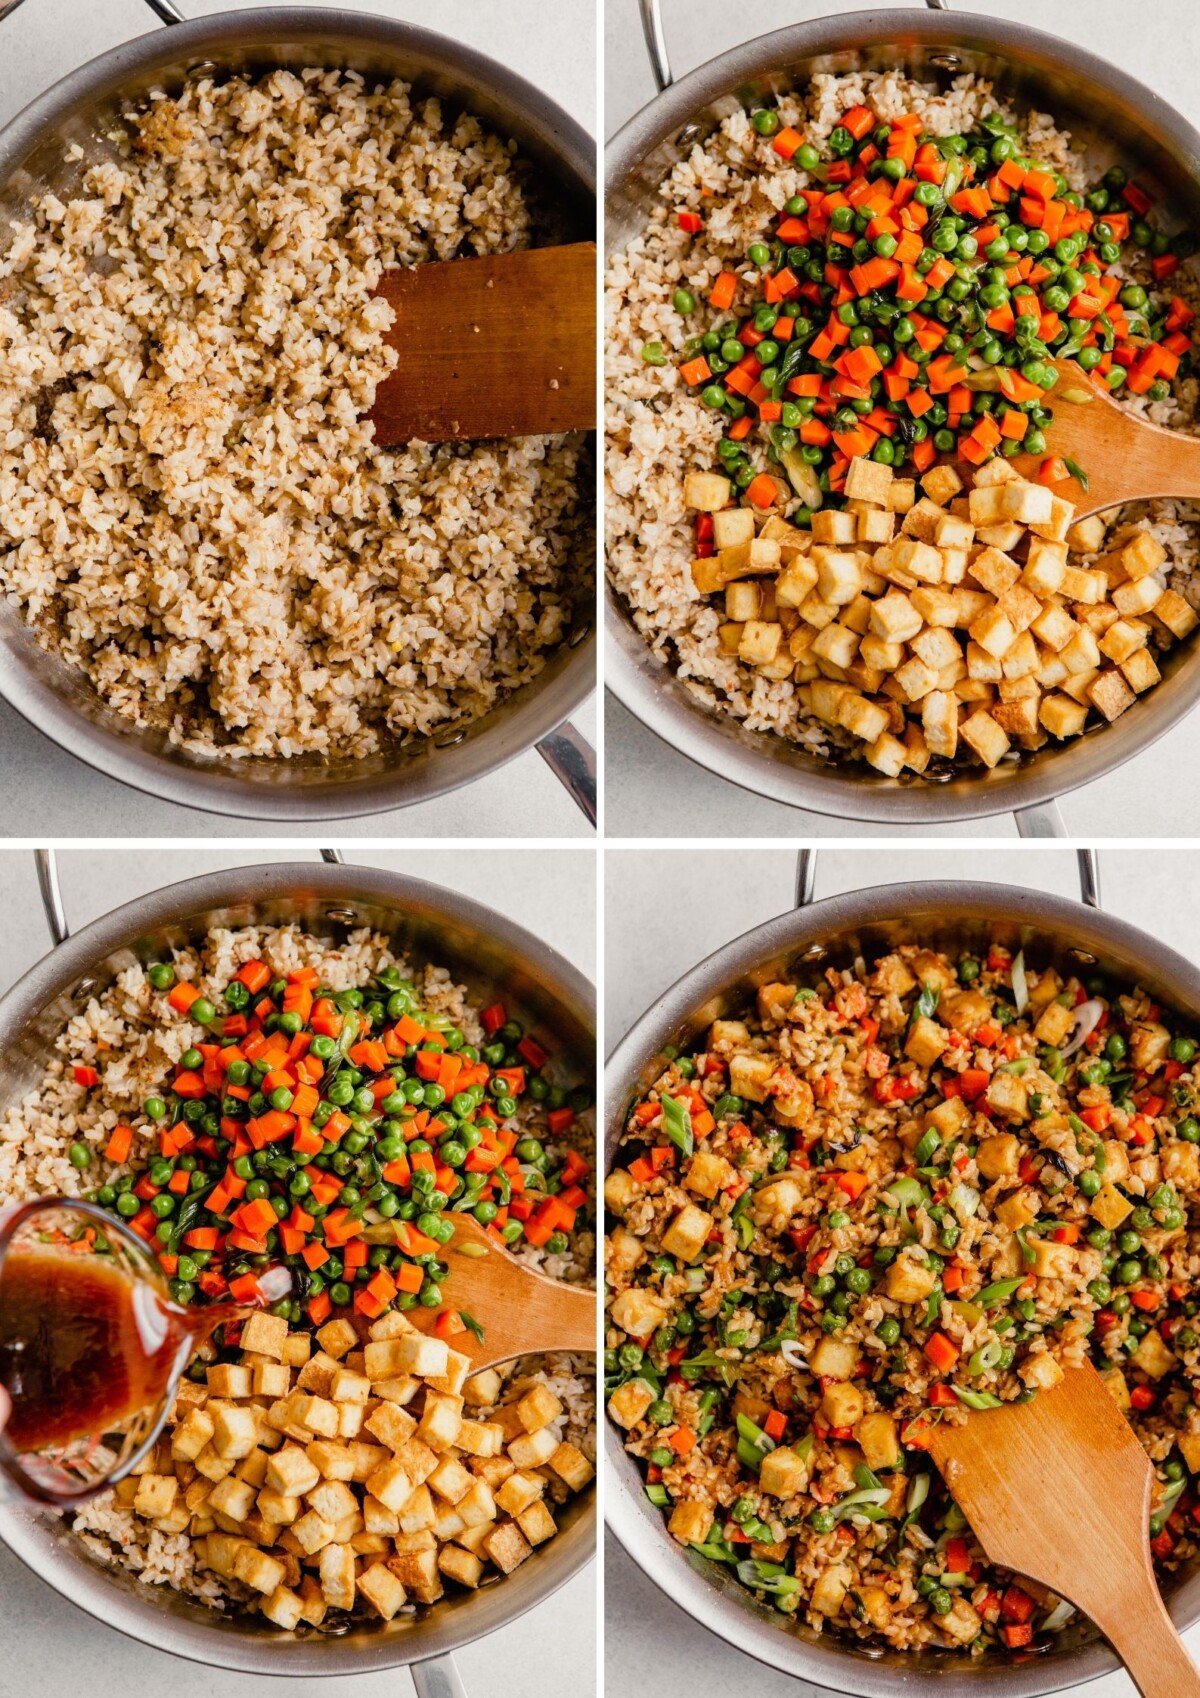 grid of images showing how to make fried rice—cooking rice, adding veggies, adding tofu, adding sauce